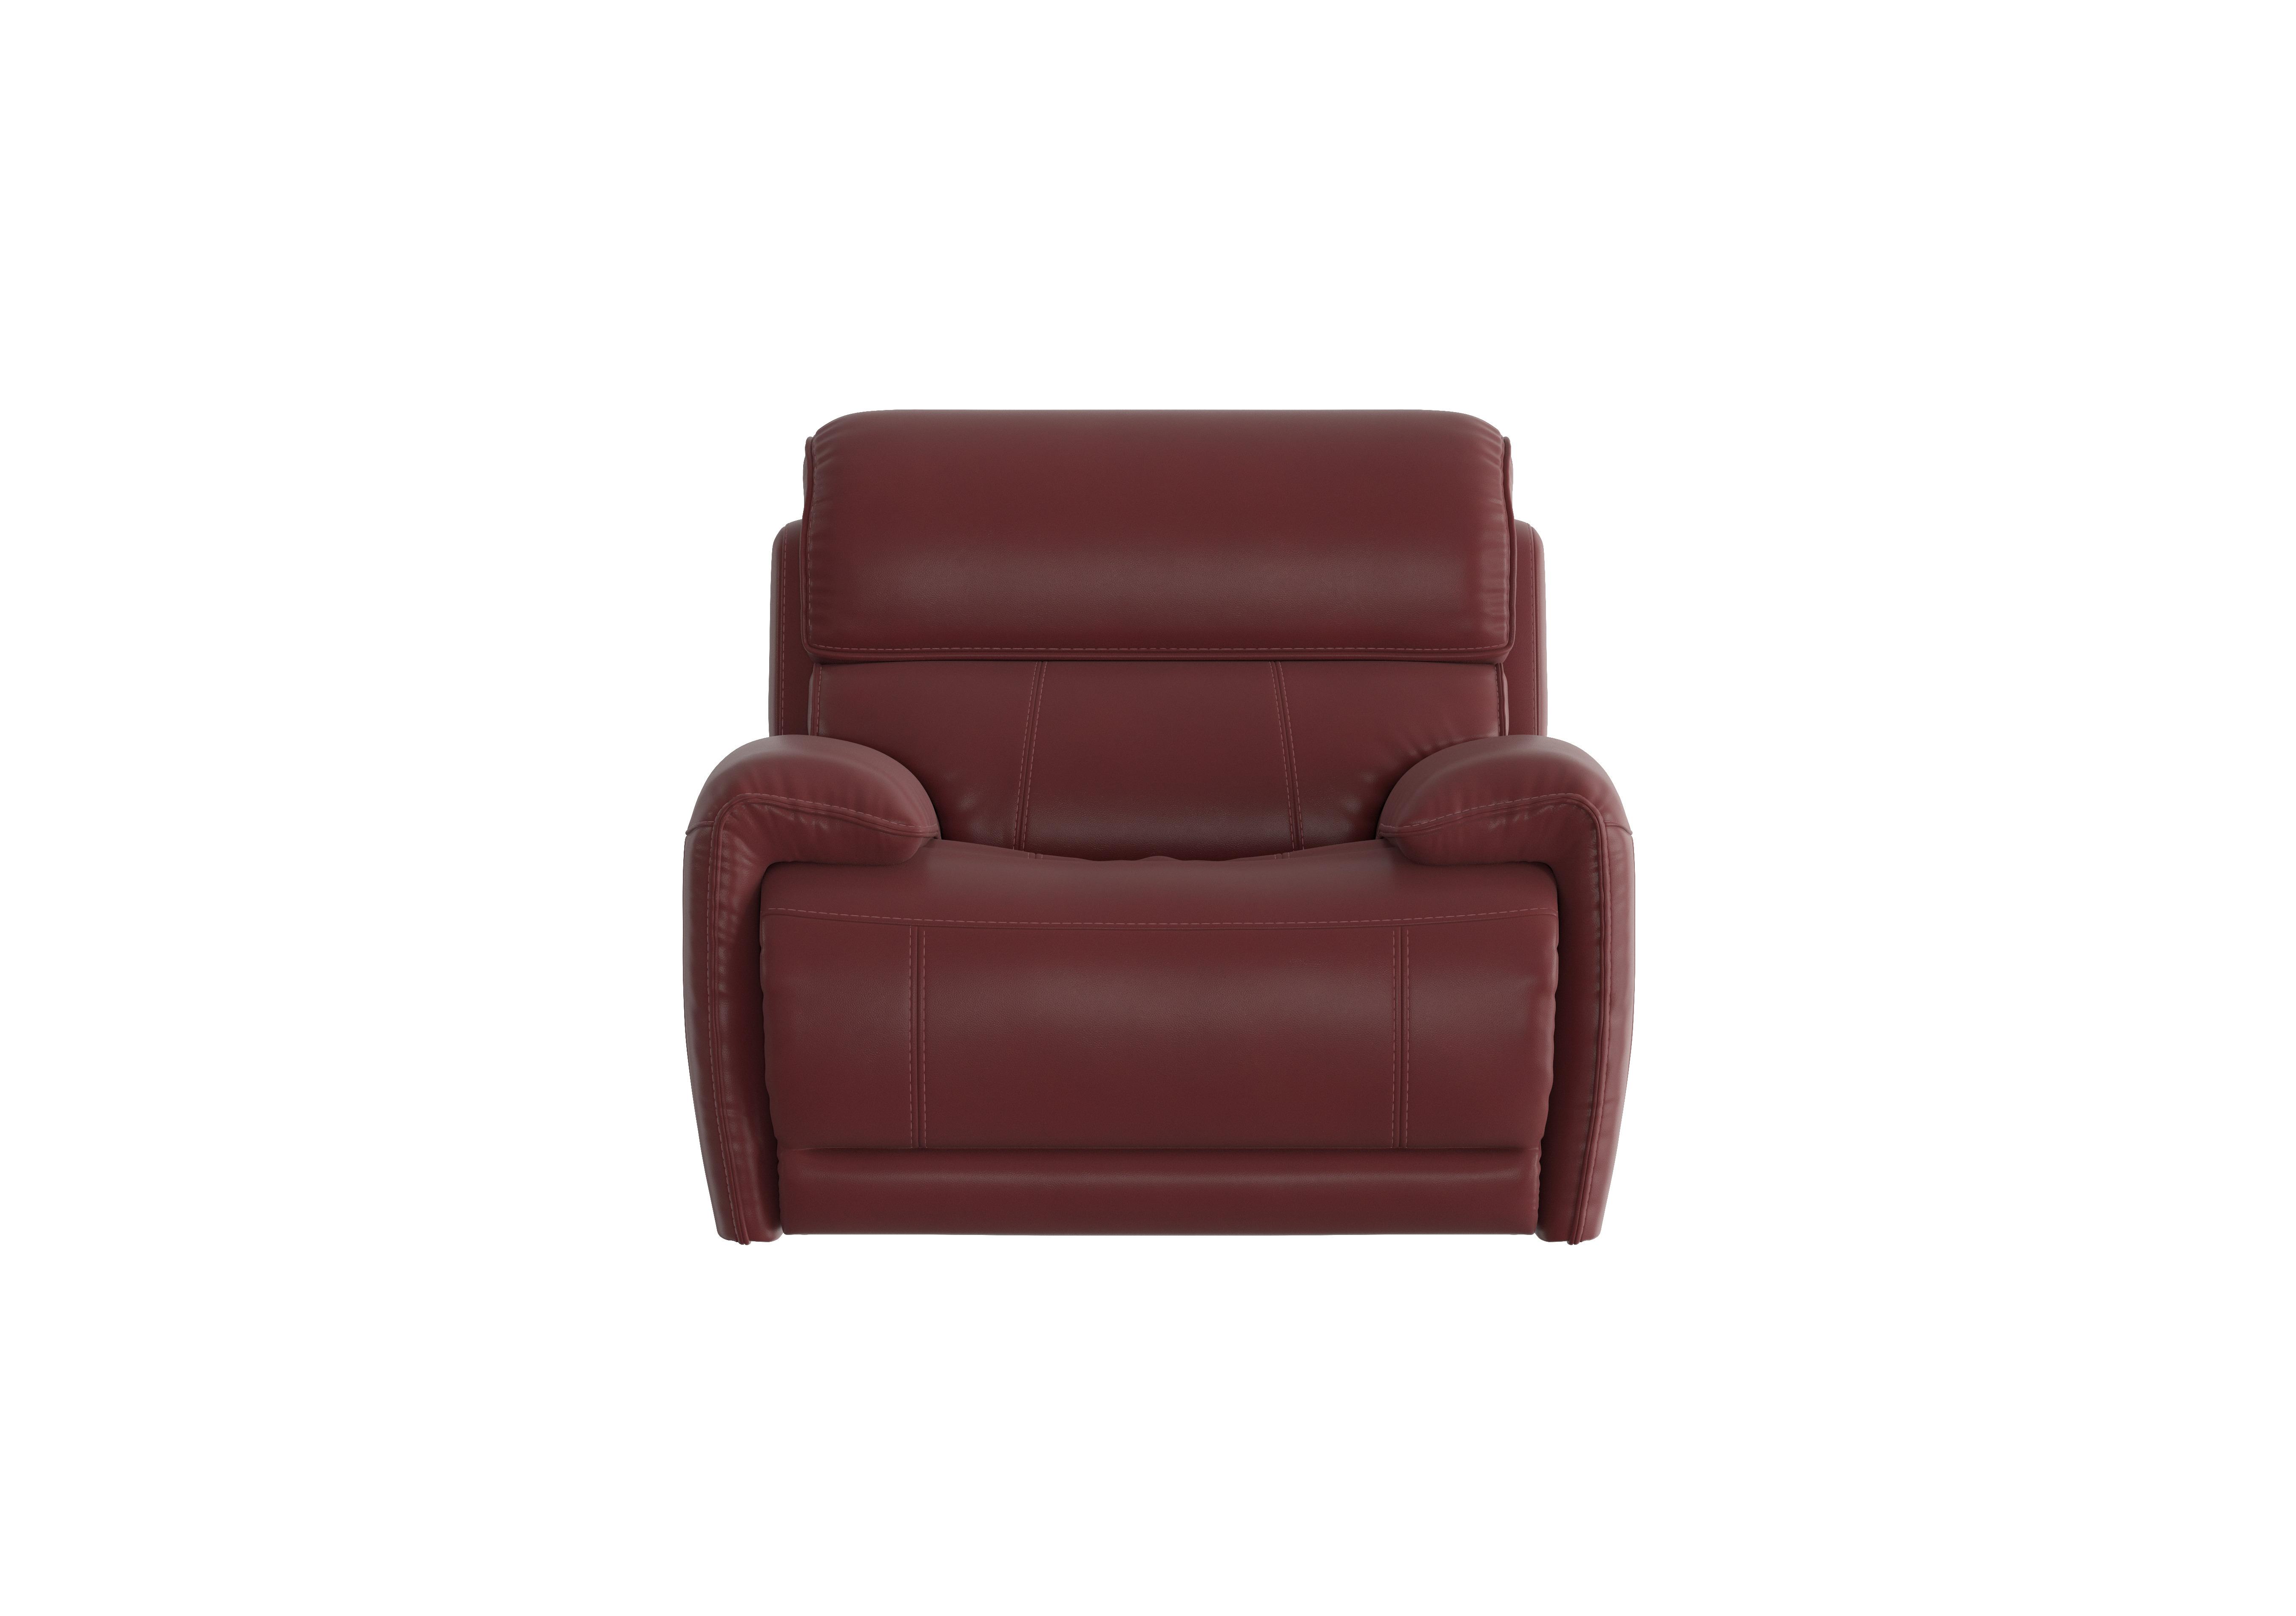 Link Leather Power Recliner Armchair with Power Headrest in Bv-035c Deep Red on Furniture Village